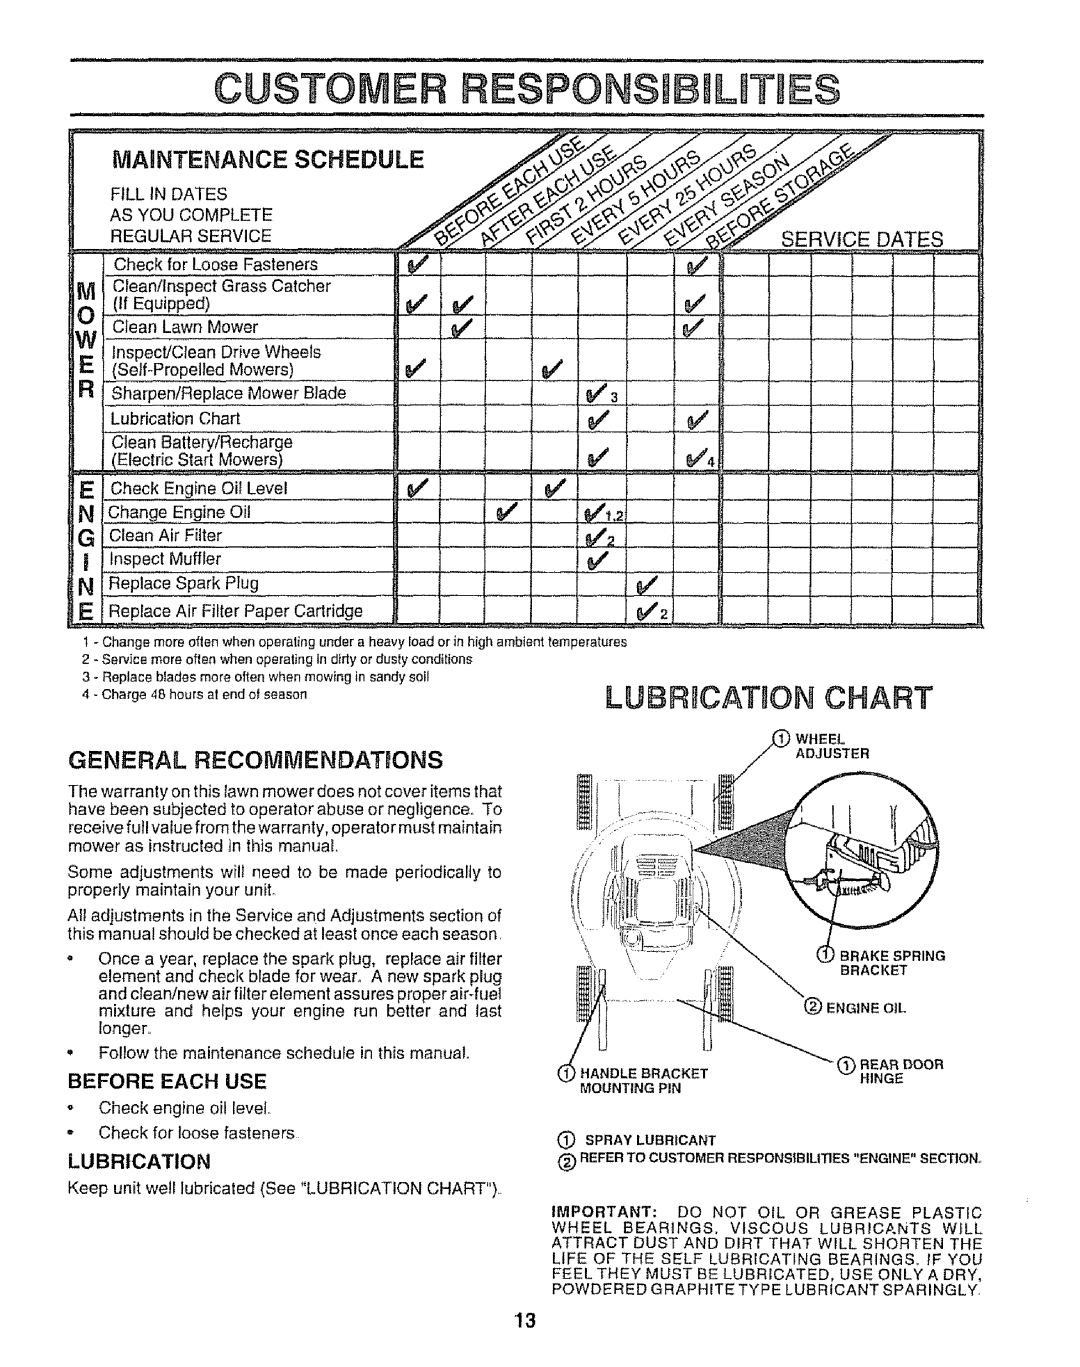 Craftsman 917.373841 Lubrication Chant, ch.r e, o,eodo,,e.o=, Maintenance, Schedule, General Recommendations, Service 